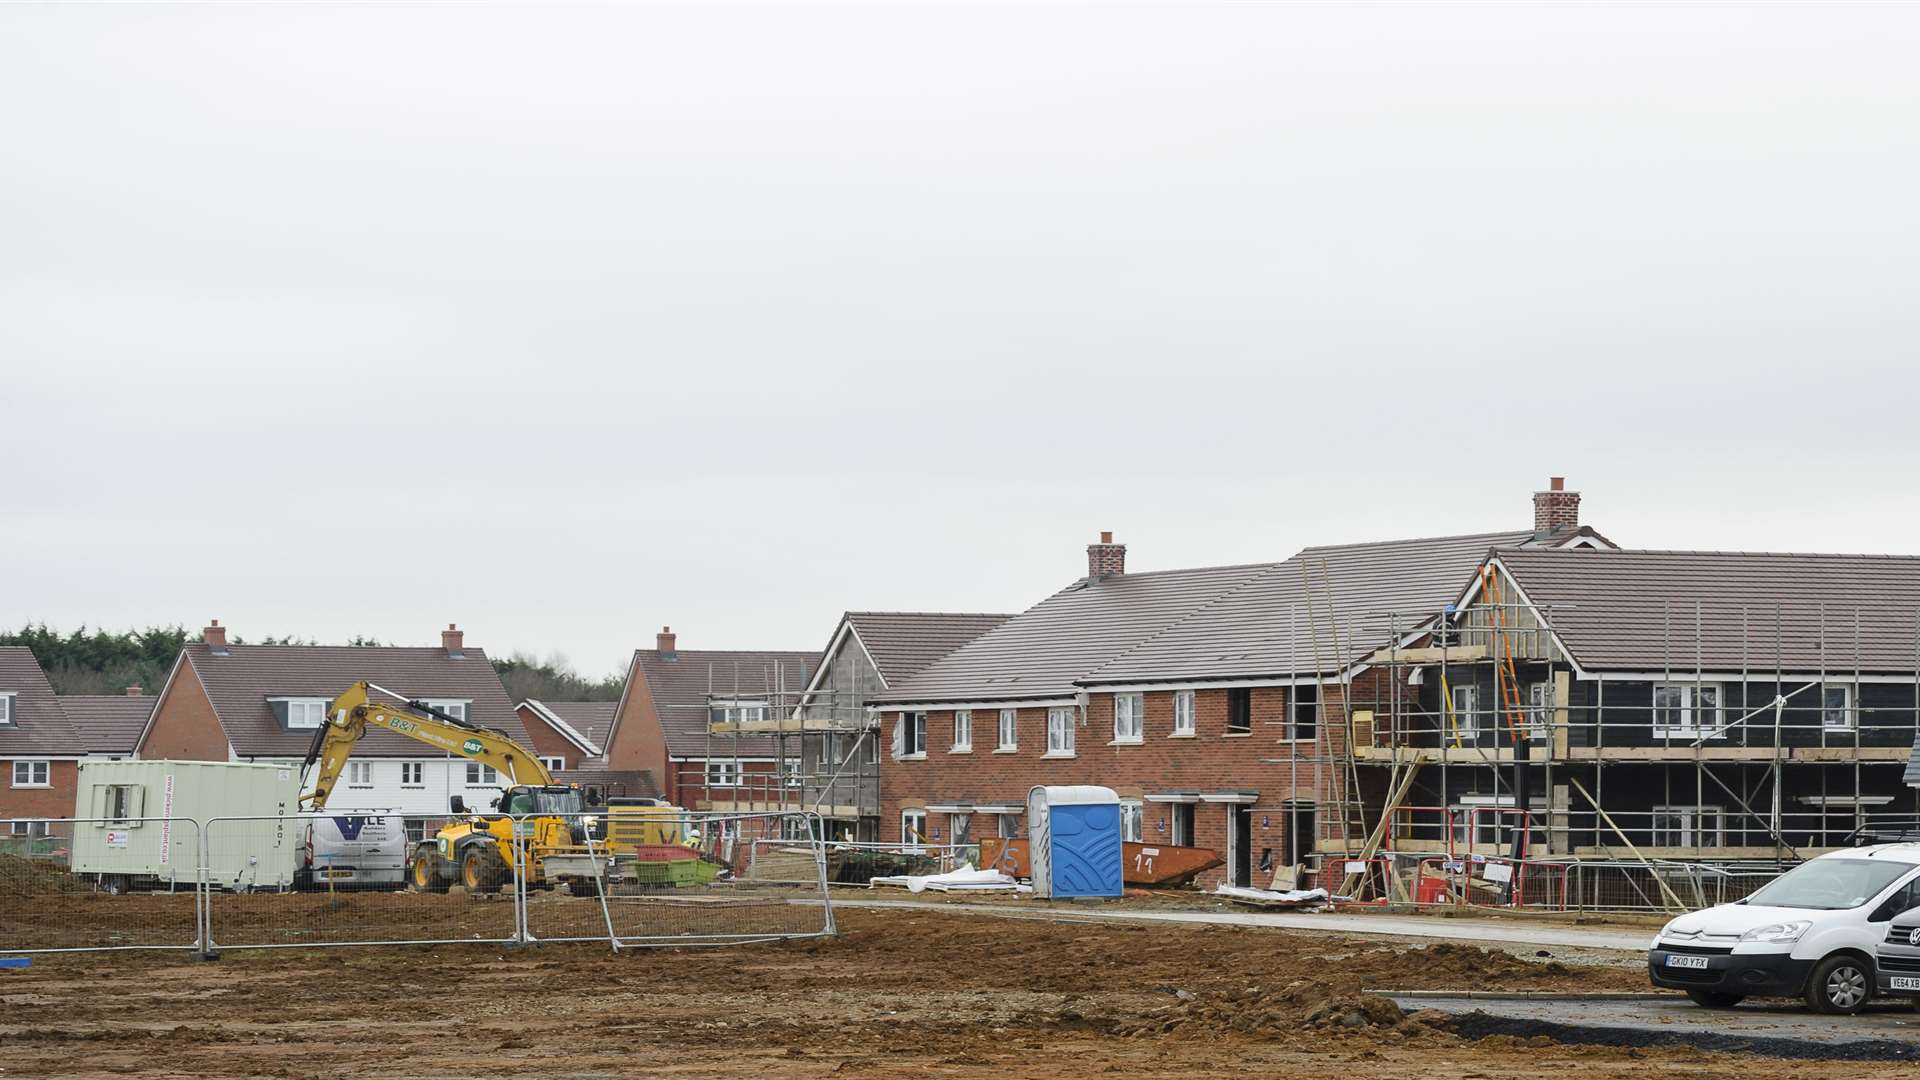 Taylor Wimpey’s Langley Park development, off Sutton Road, Maidstone